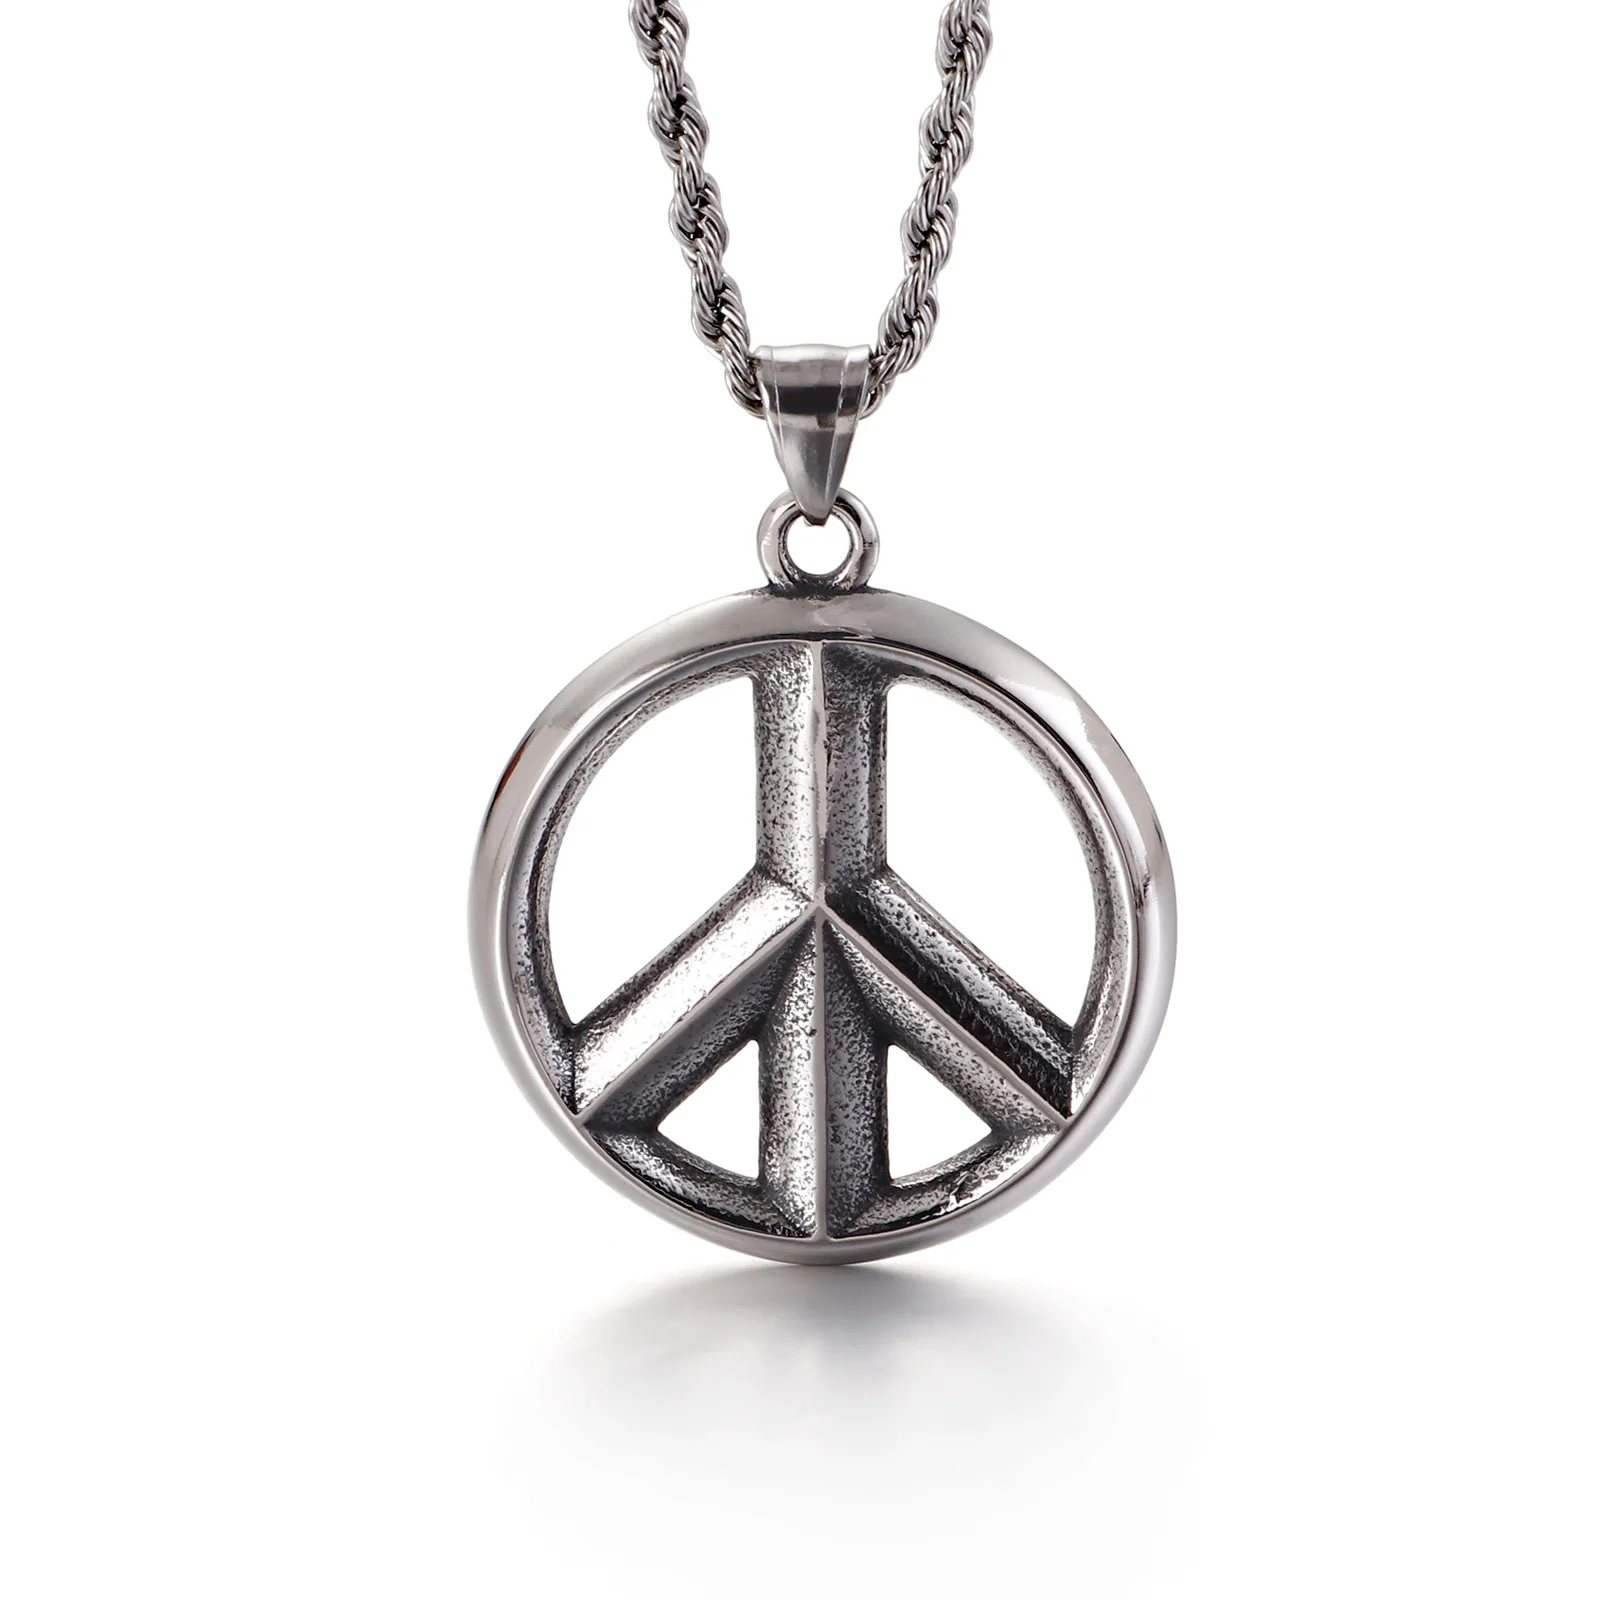 

KALEN peace and anti-war sign stainless steel men's pendant